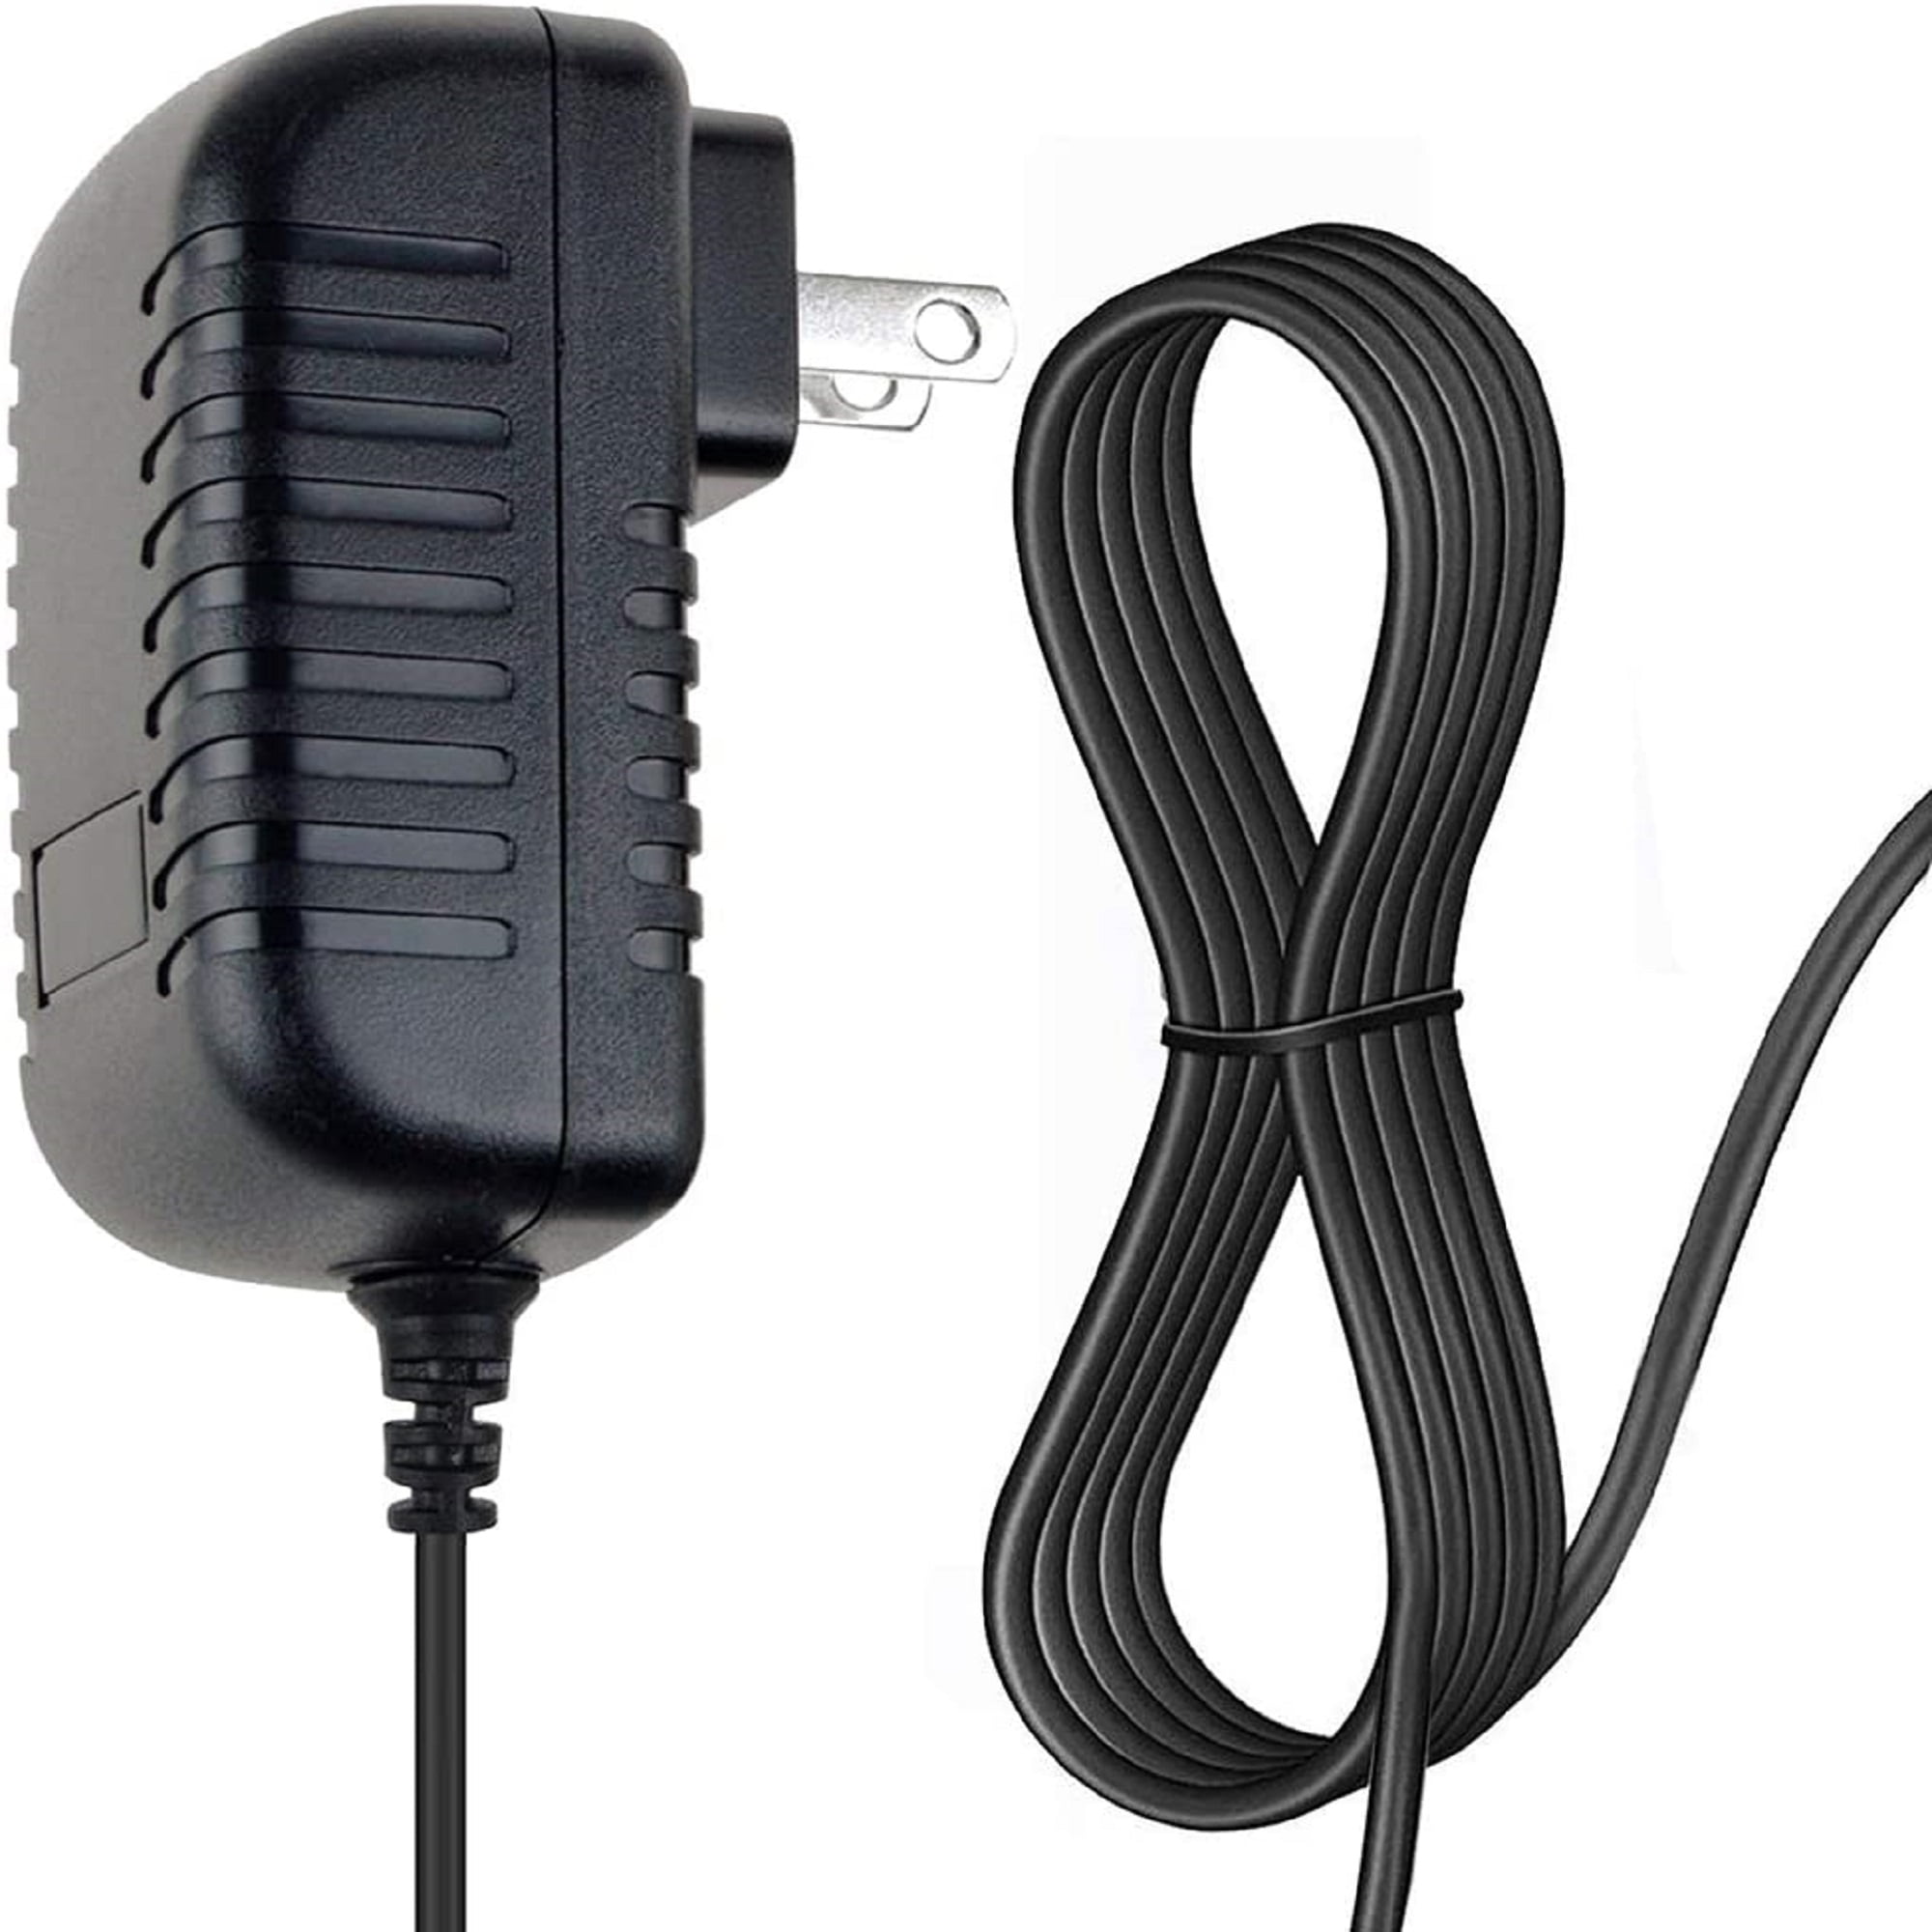 AC adapter for Vision Fitness Power supply Bikes & Ellipticals 52004391 modles 